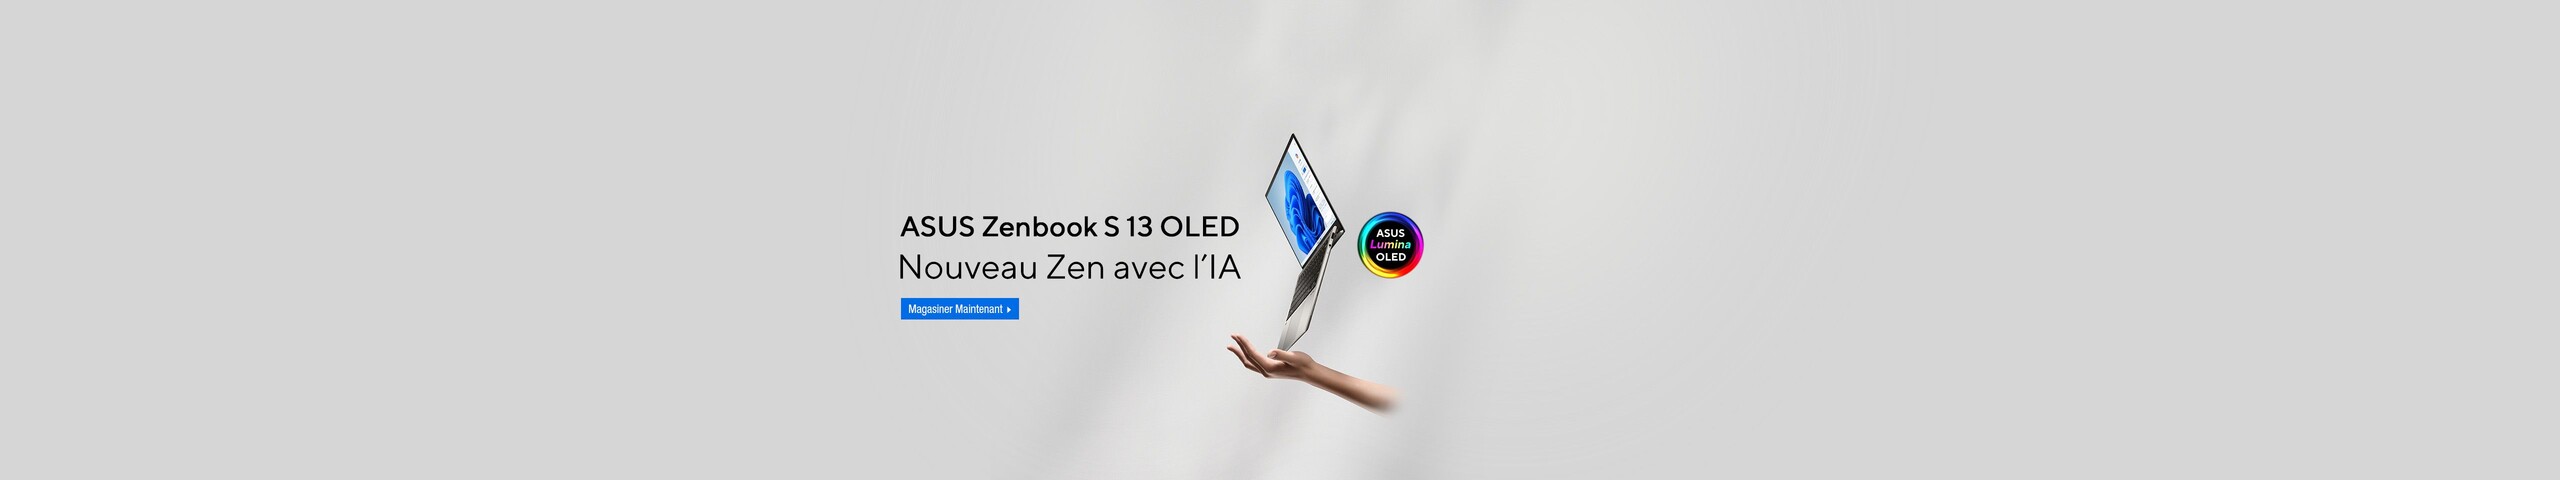 Zenbook S 13 OLED New Zen with AI